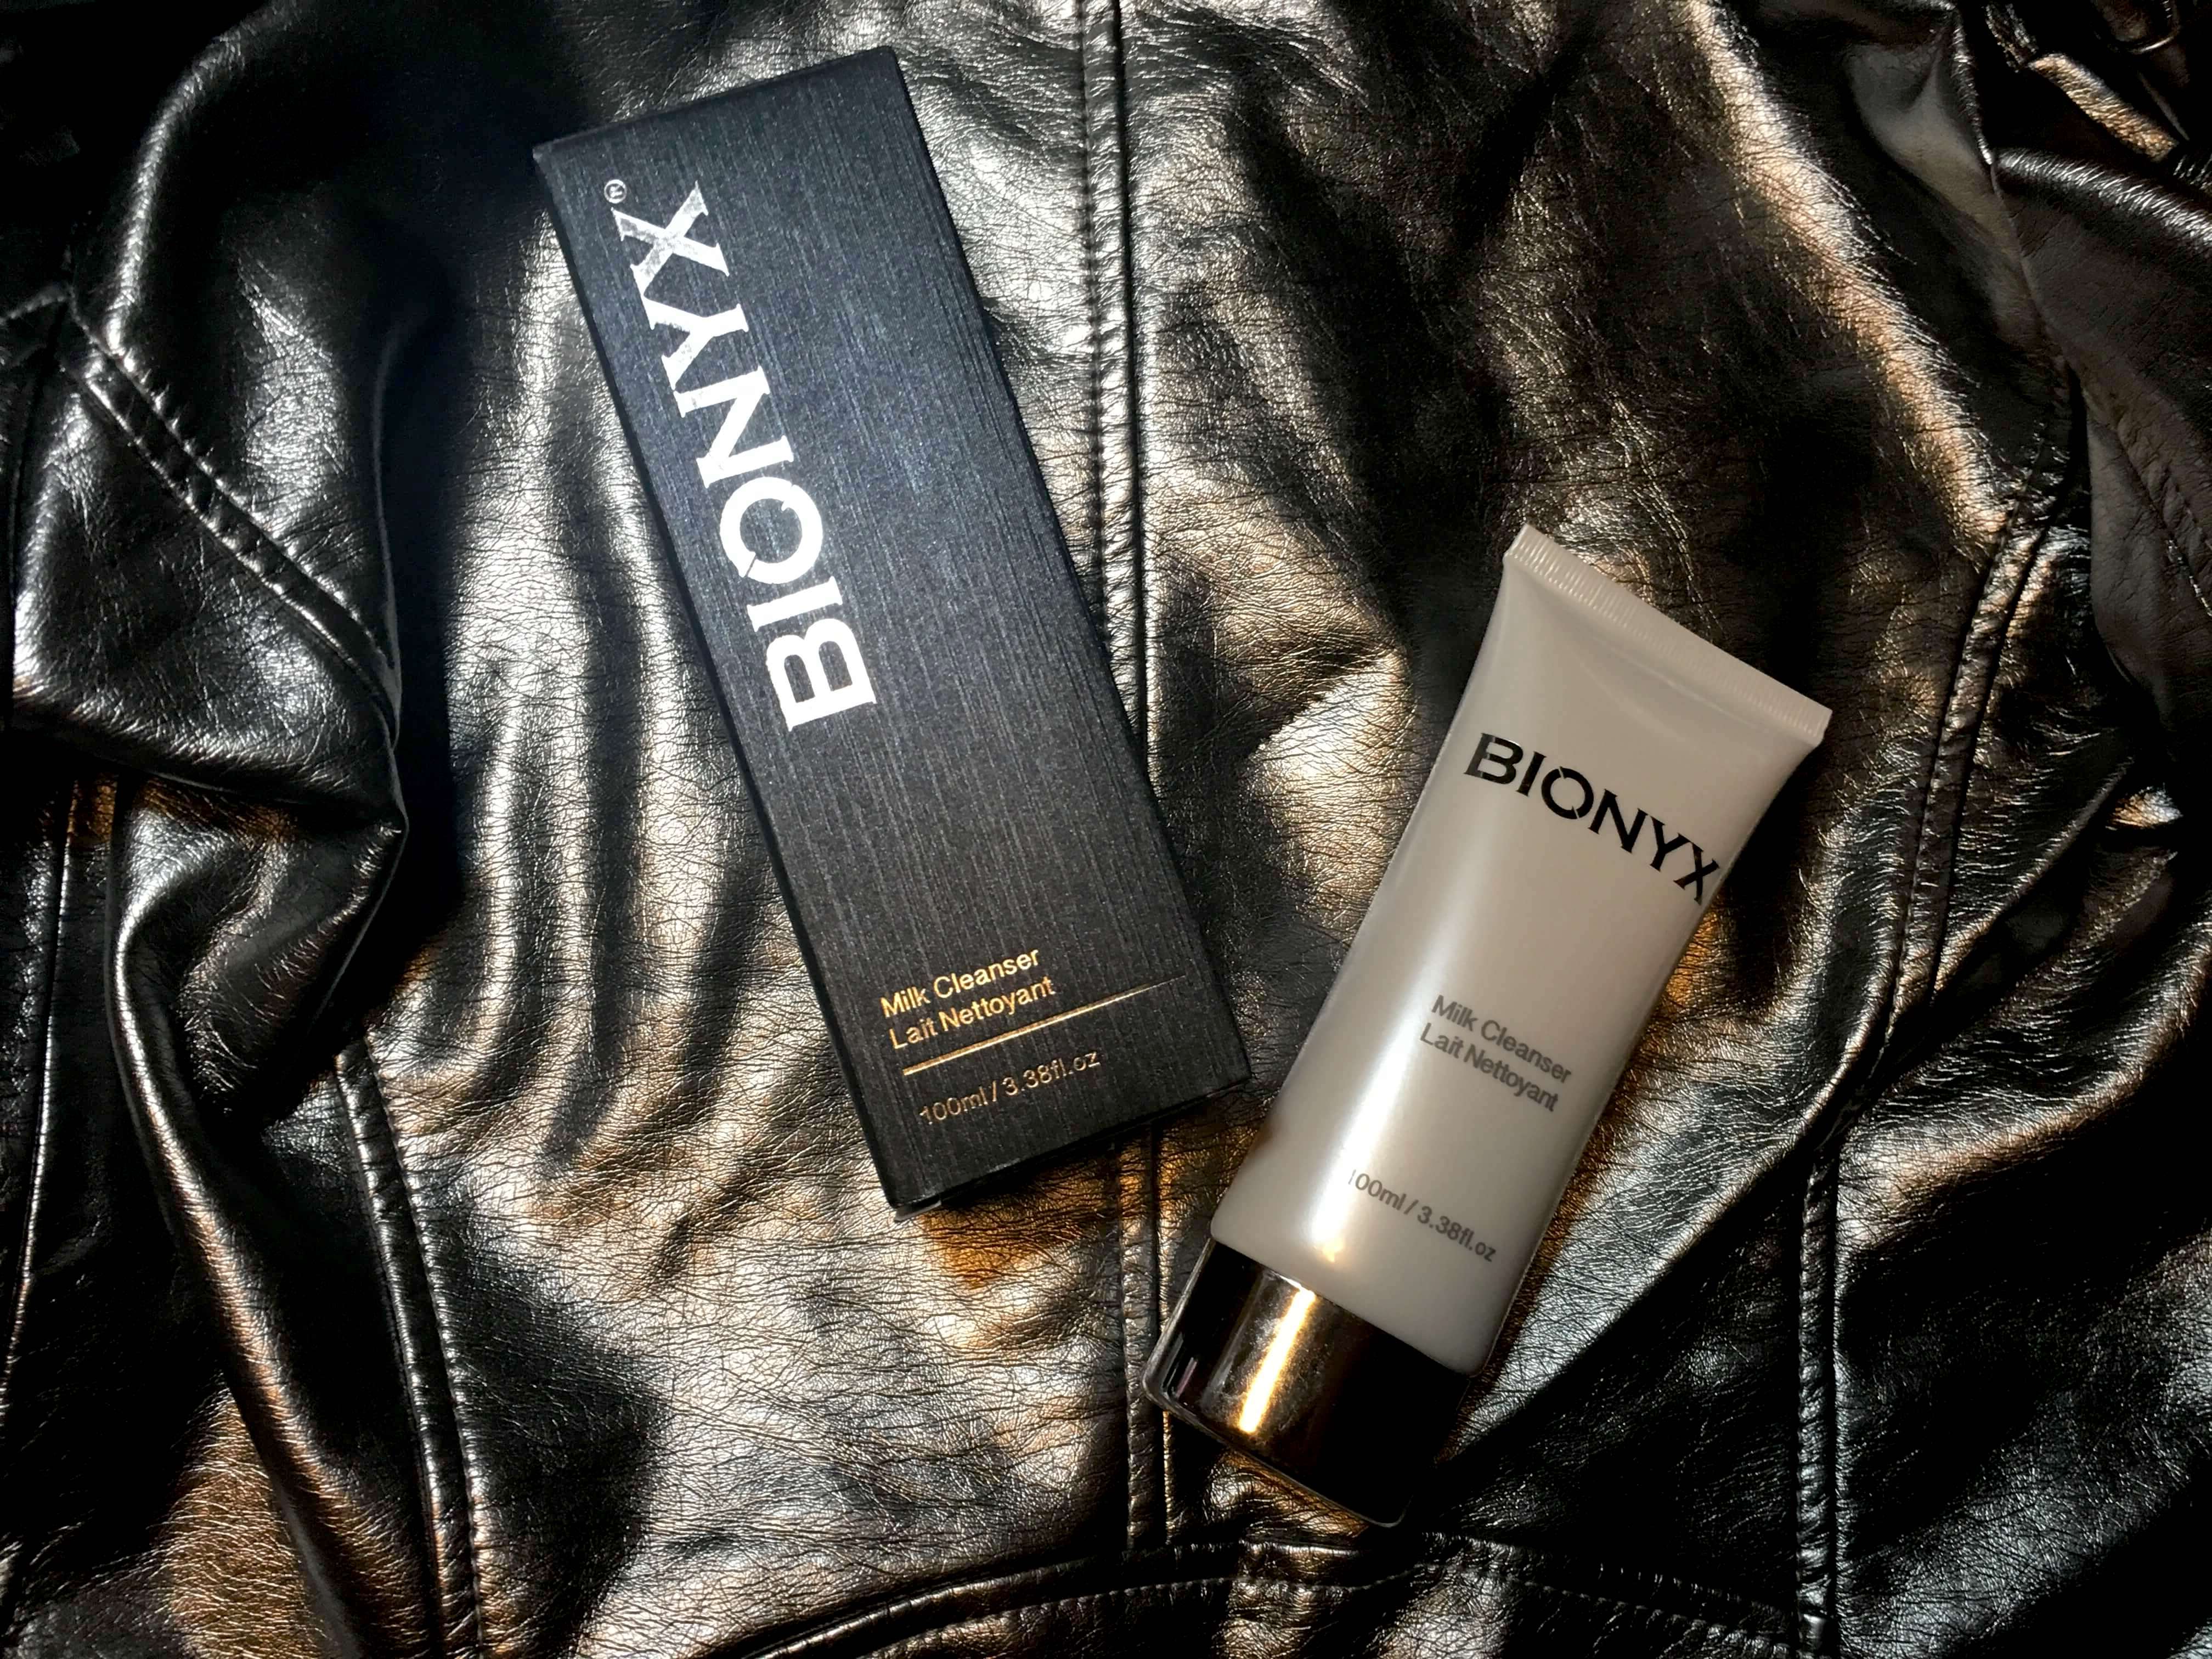 Bionyx Milk Cleanser review